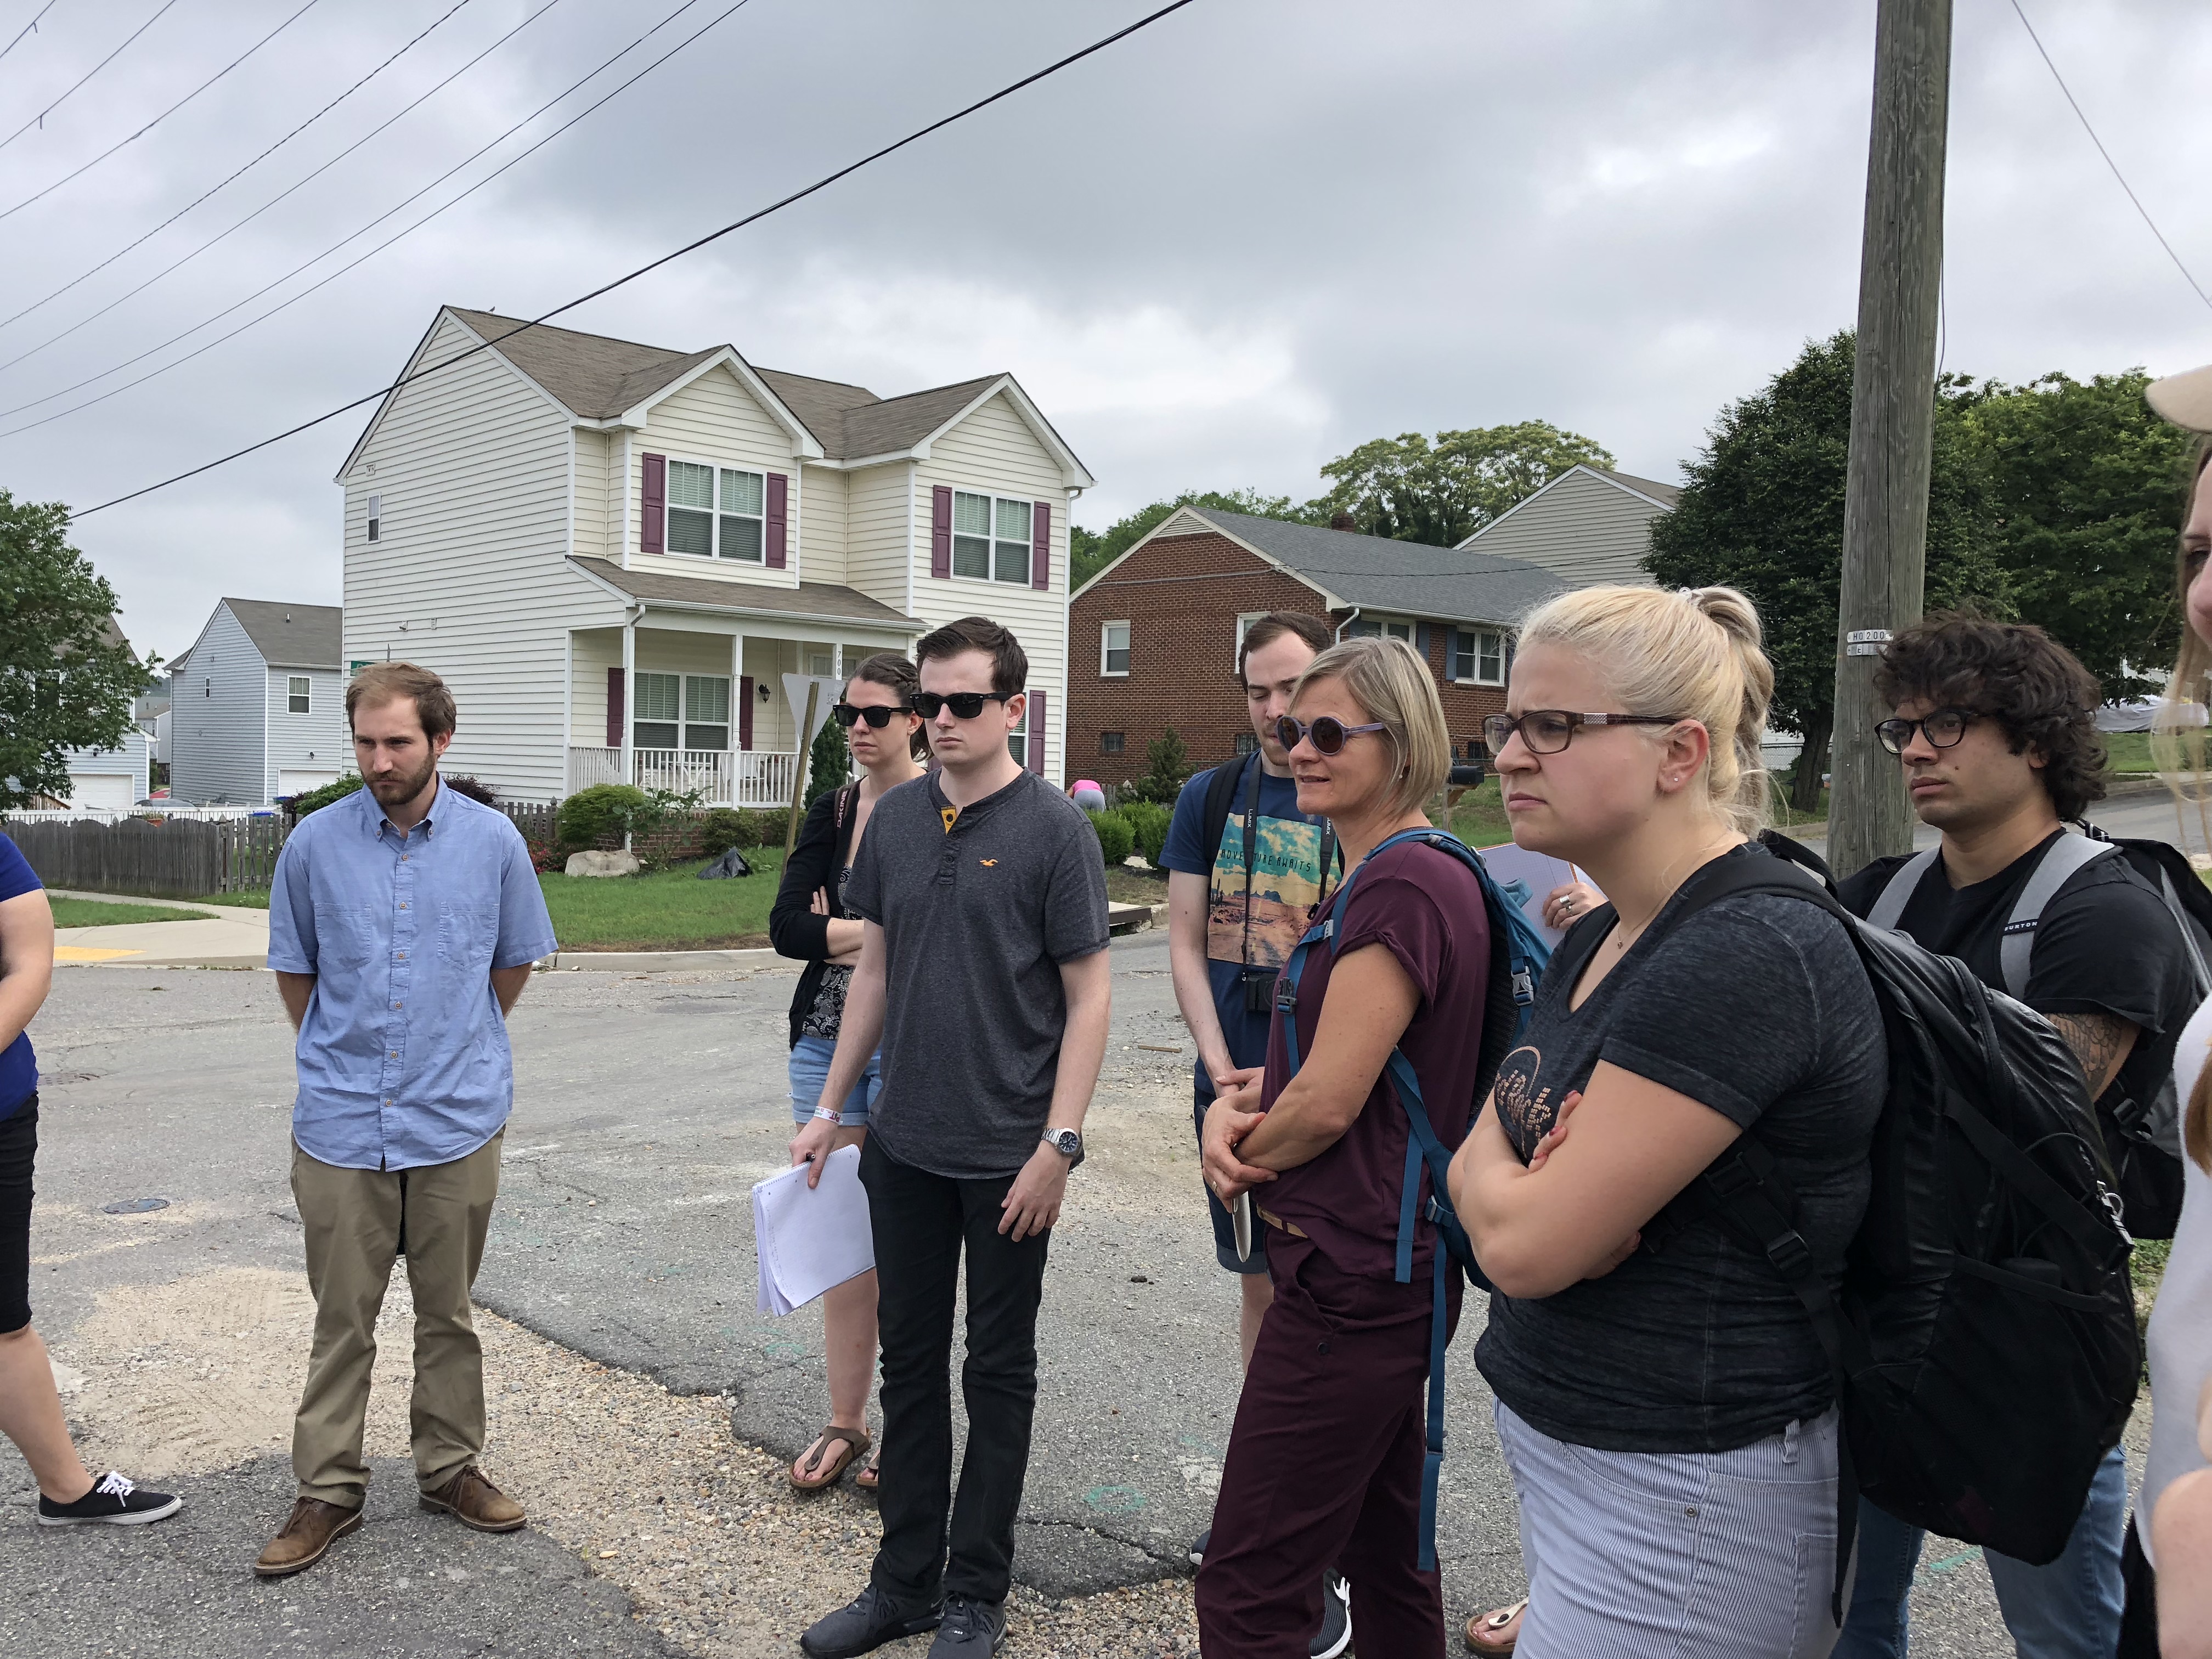 (Top) German exchange students, accompanied by their Wilder School hosts, tour Richmond's Fulton neighborhood. (Middle) German students presented to the Richmond Regional Planning District Commission on their system of planning and land use. (Below) Eights students are visiting from the University of Kaiserslautern, accompanied by two professors.